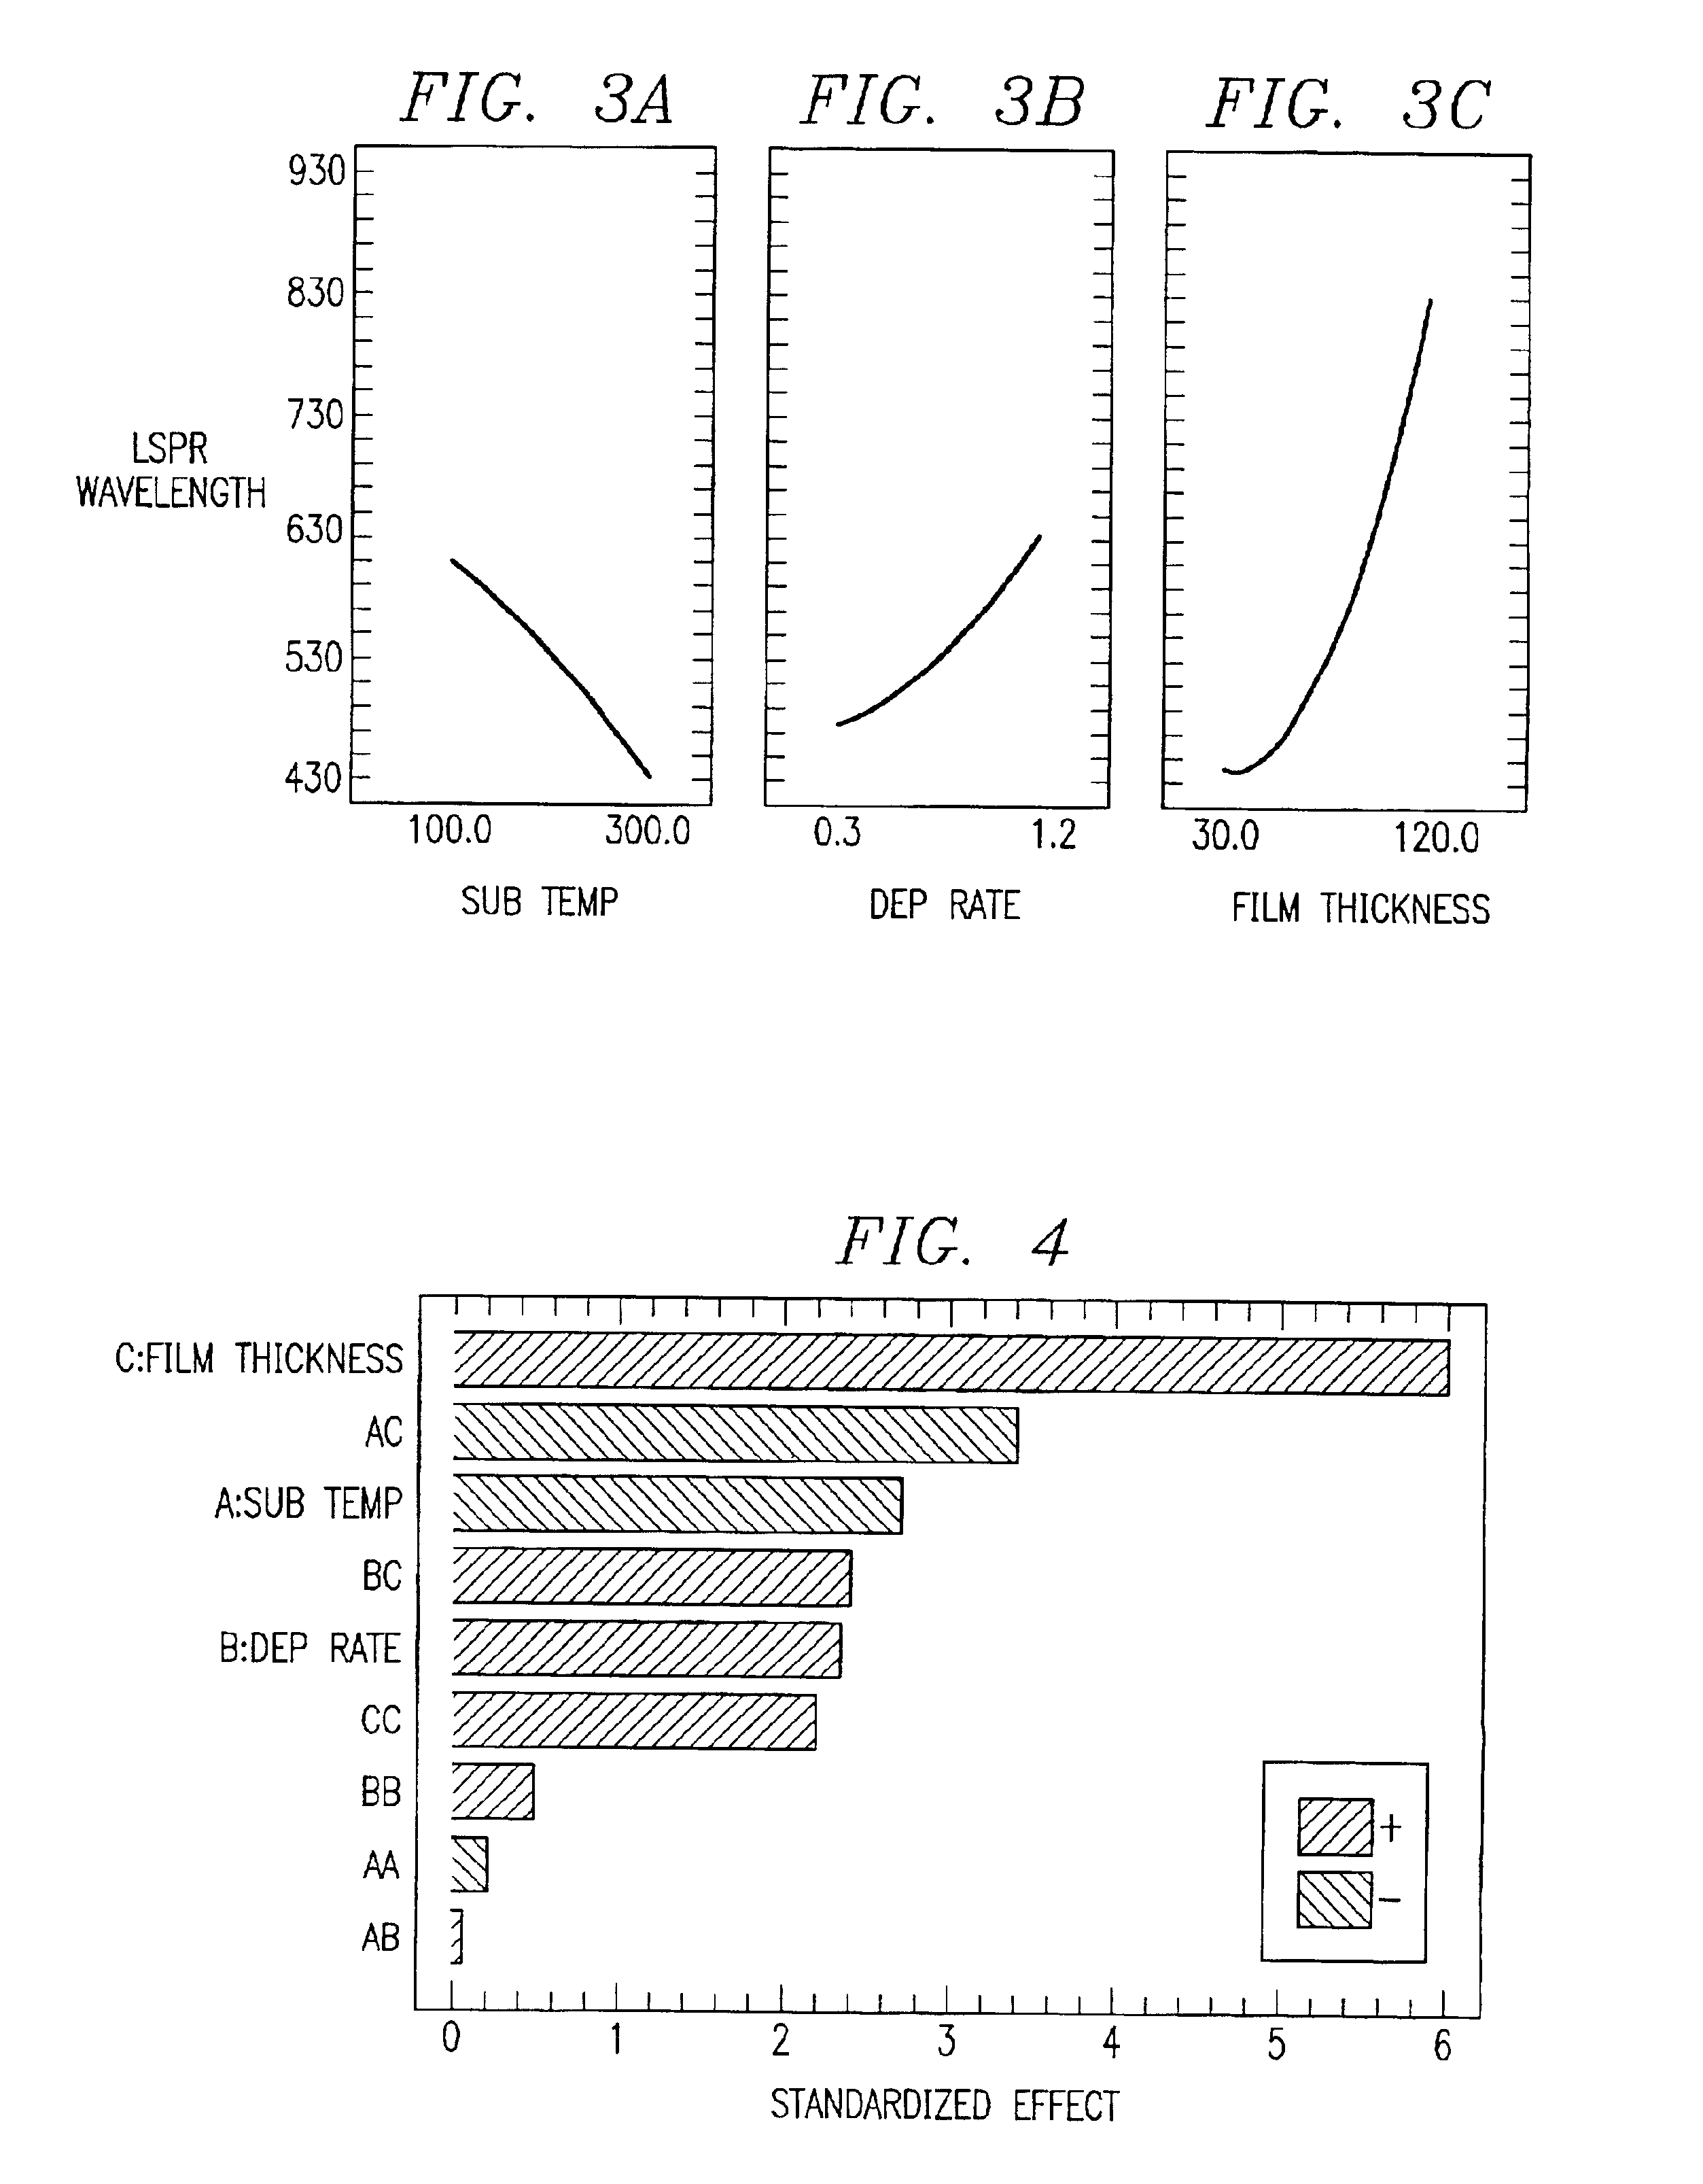 System and method for controlling deposition parameters in producing a surface to tune the surface's plasmon resonance wavelength